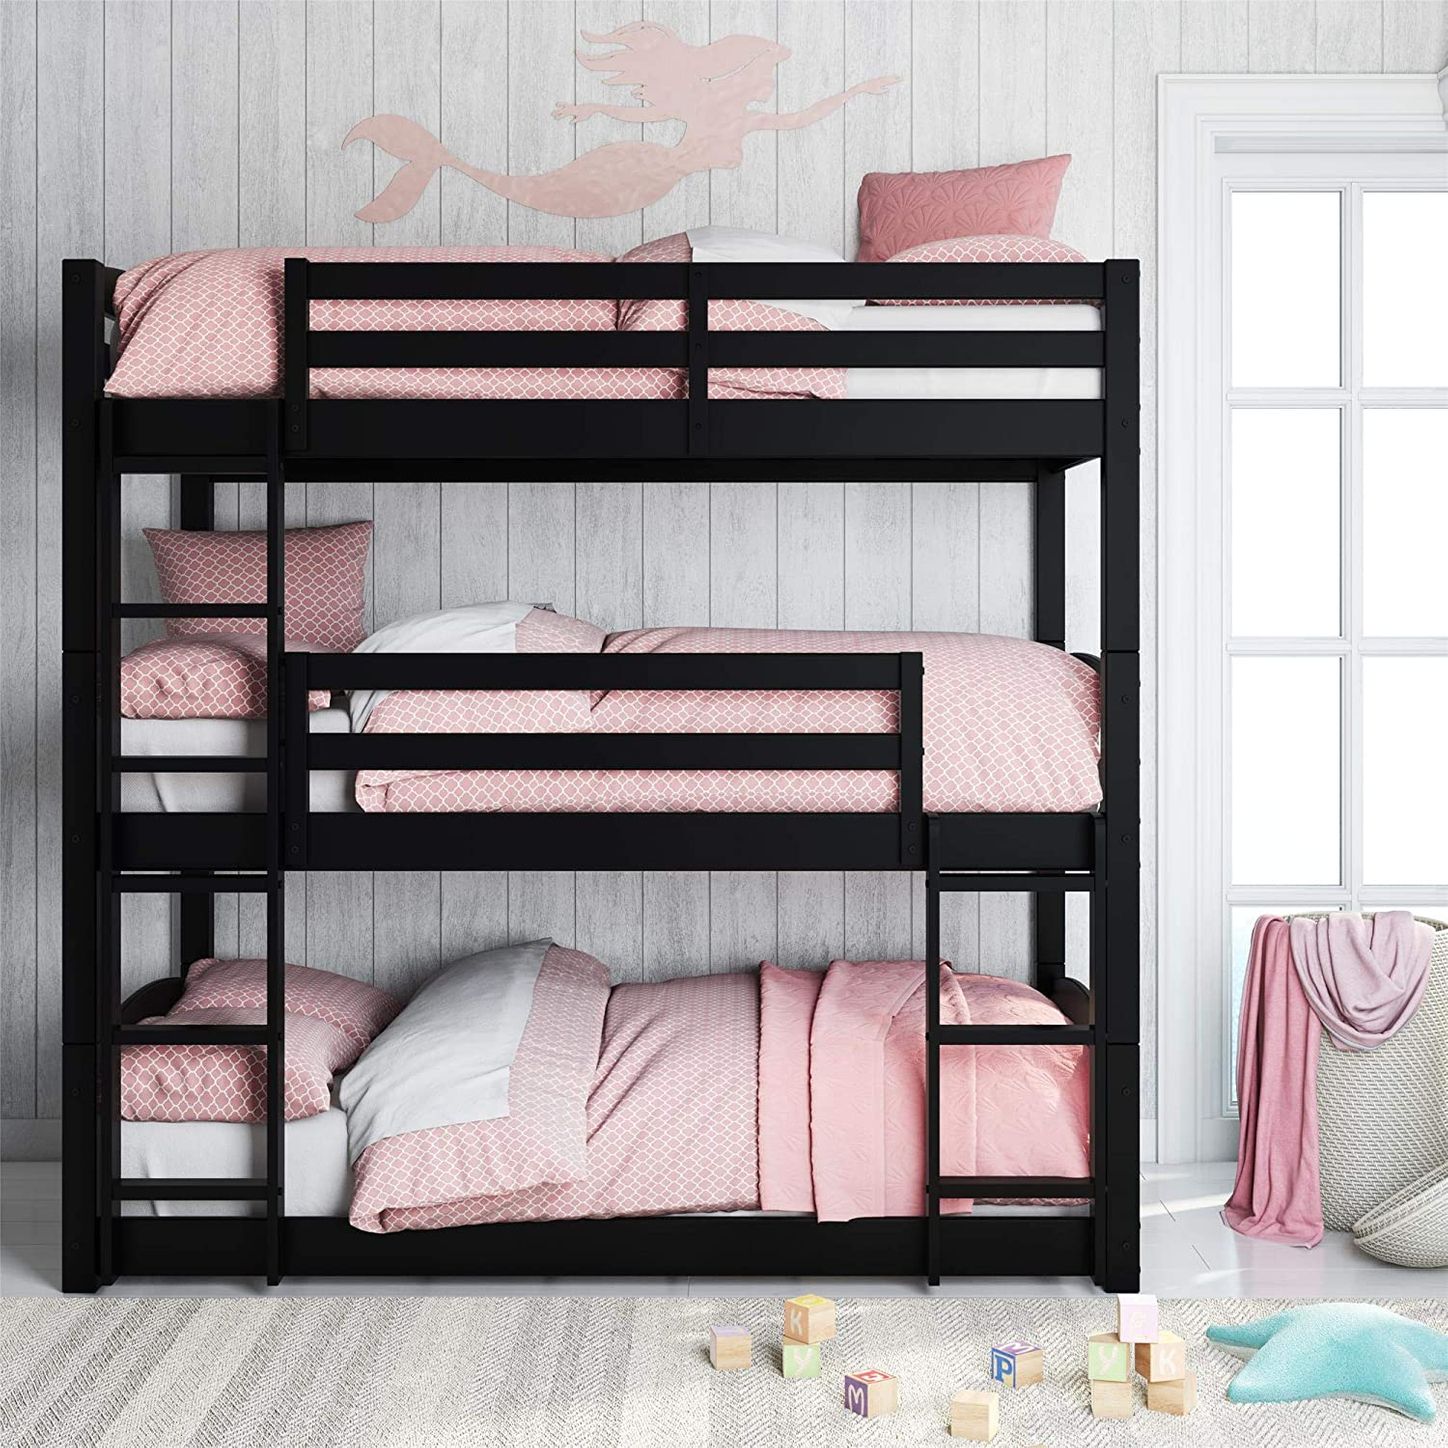 8 Best Bunk Beds 2020 The Strategist, Best Bunk Beds For Boys